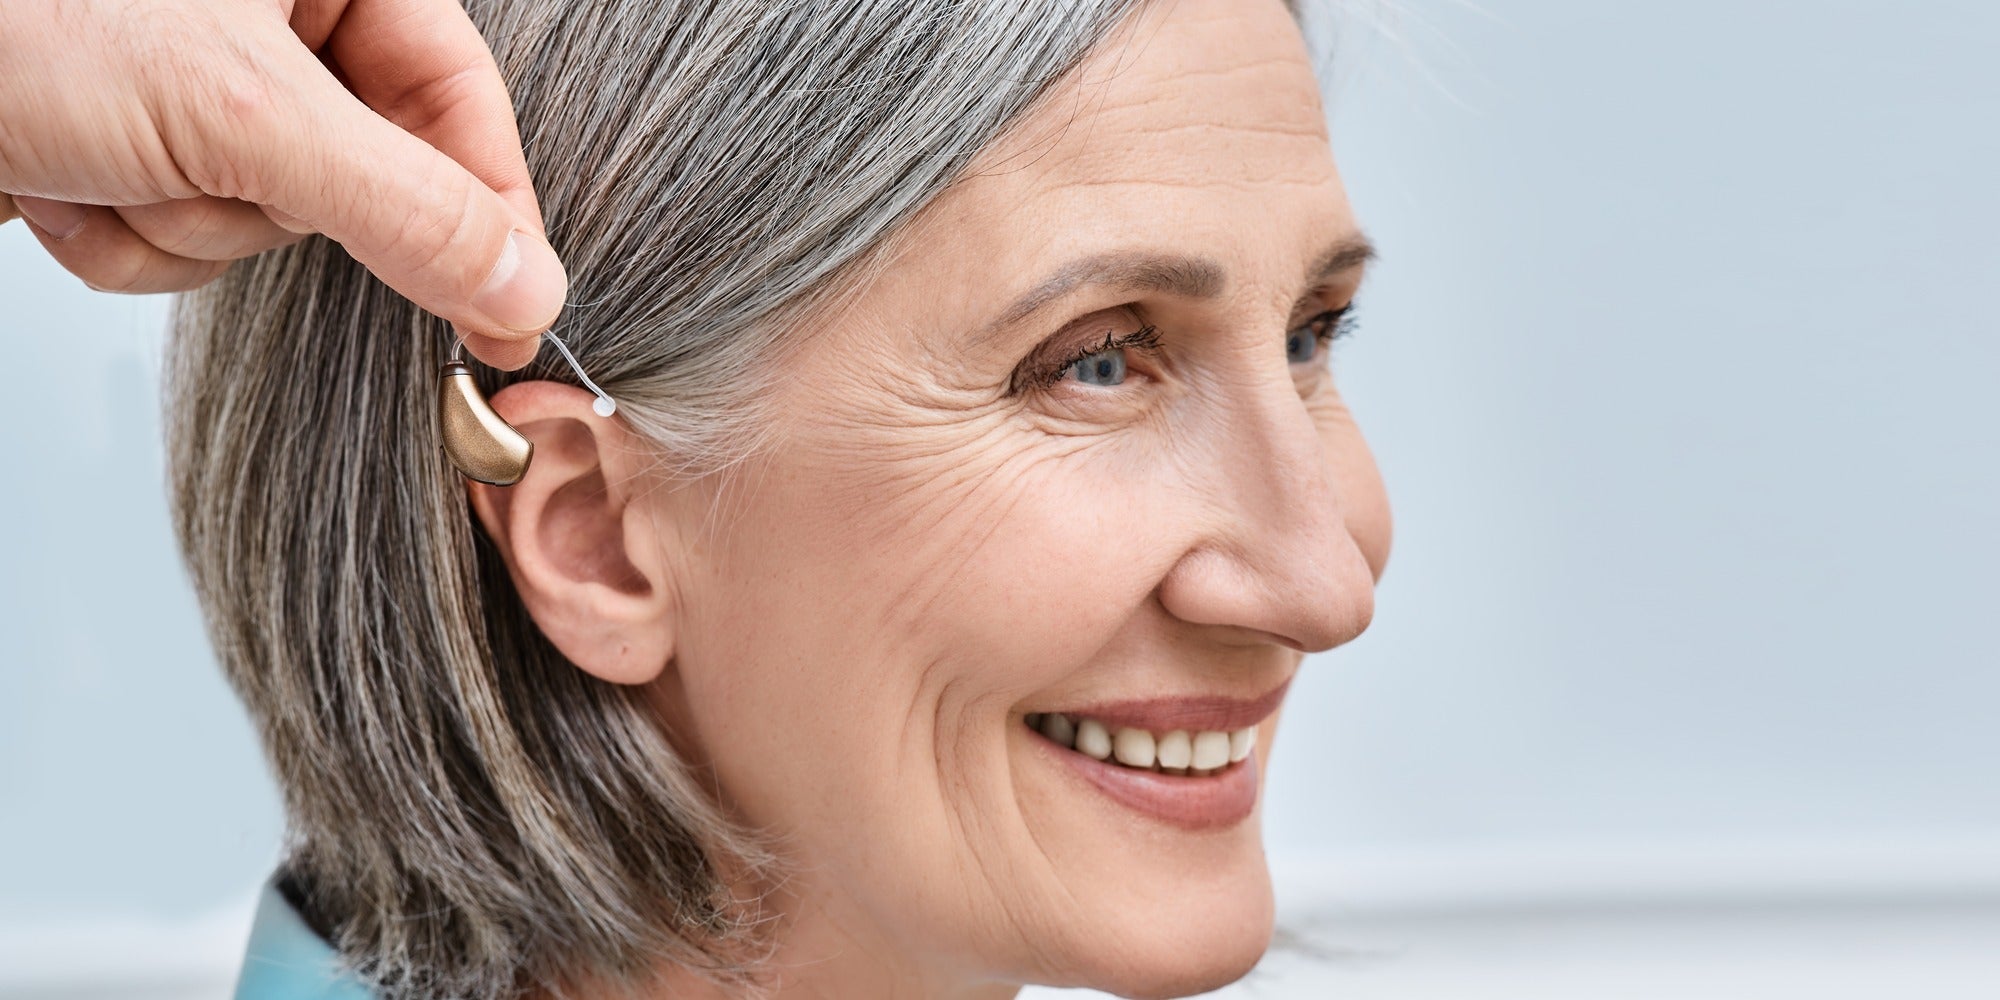 woman being fitted with hearing aid